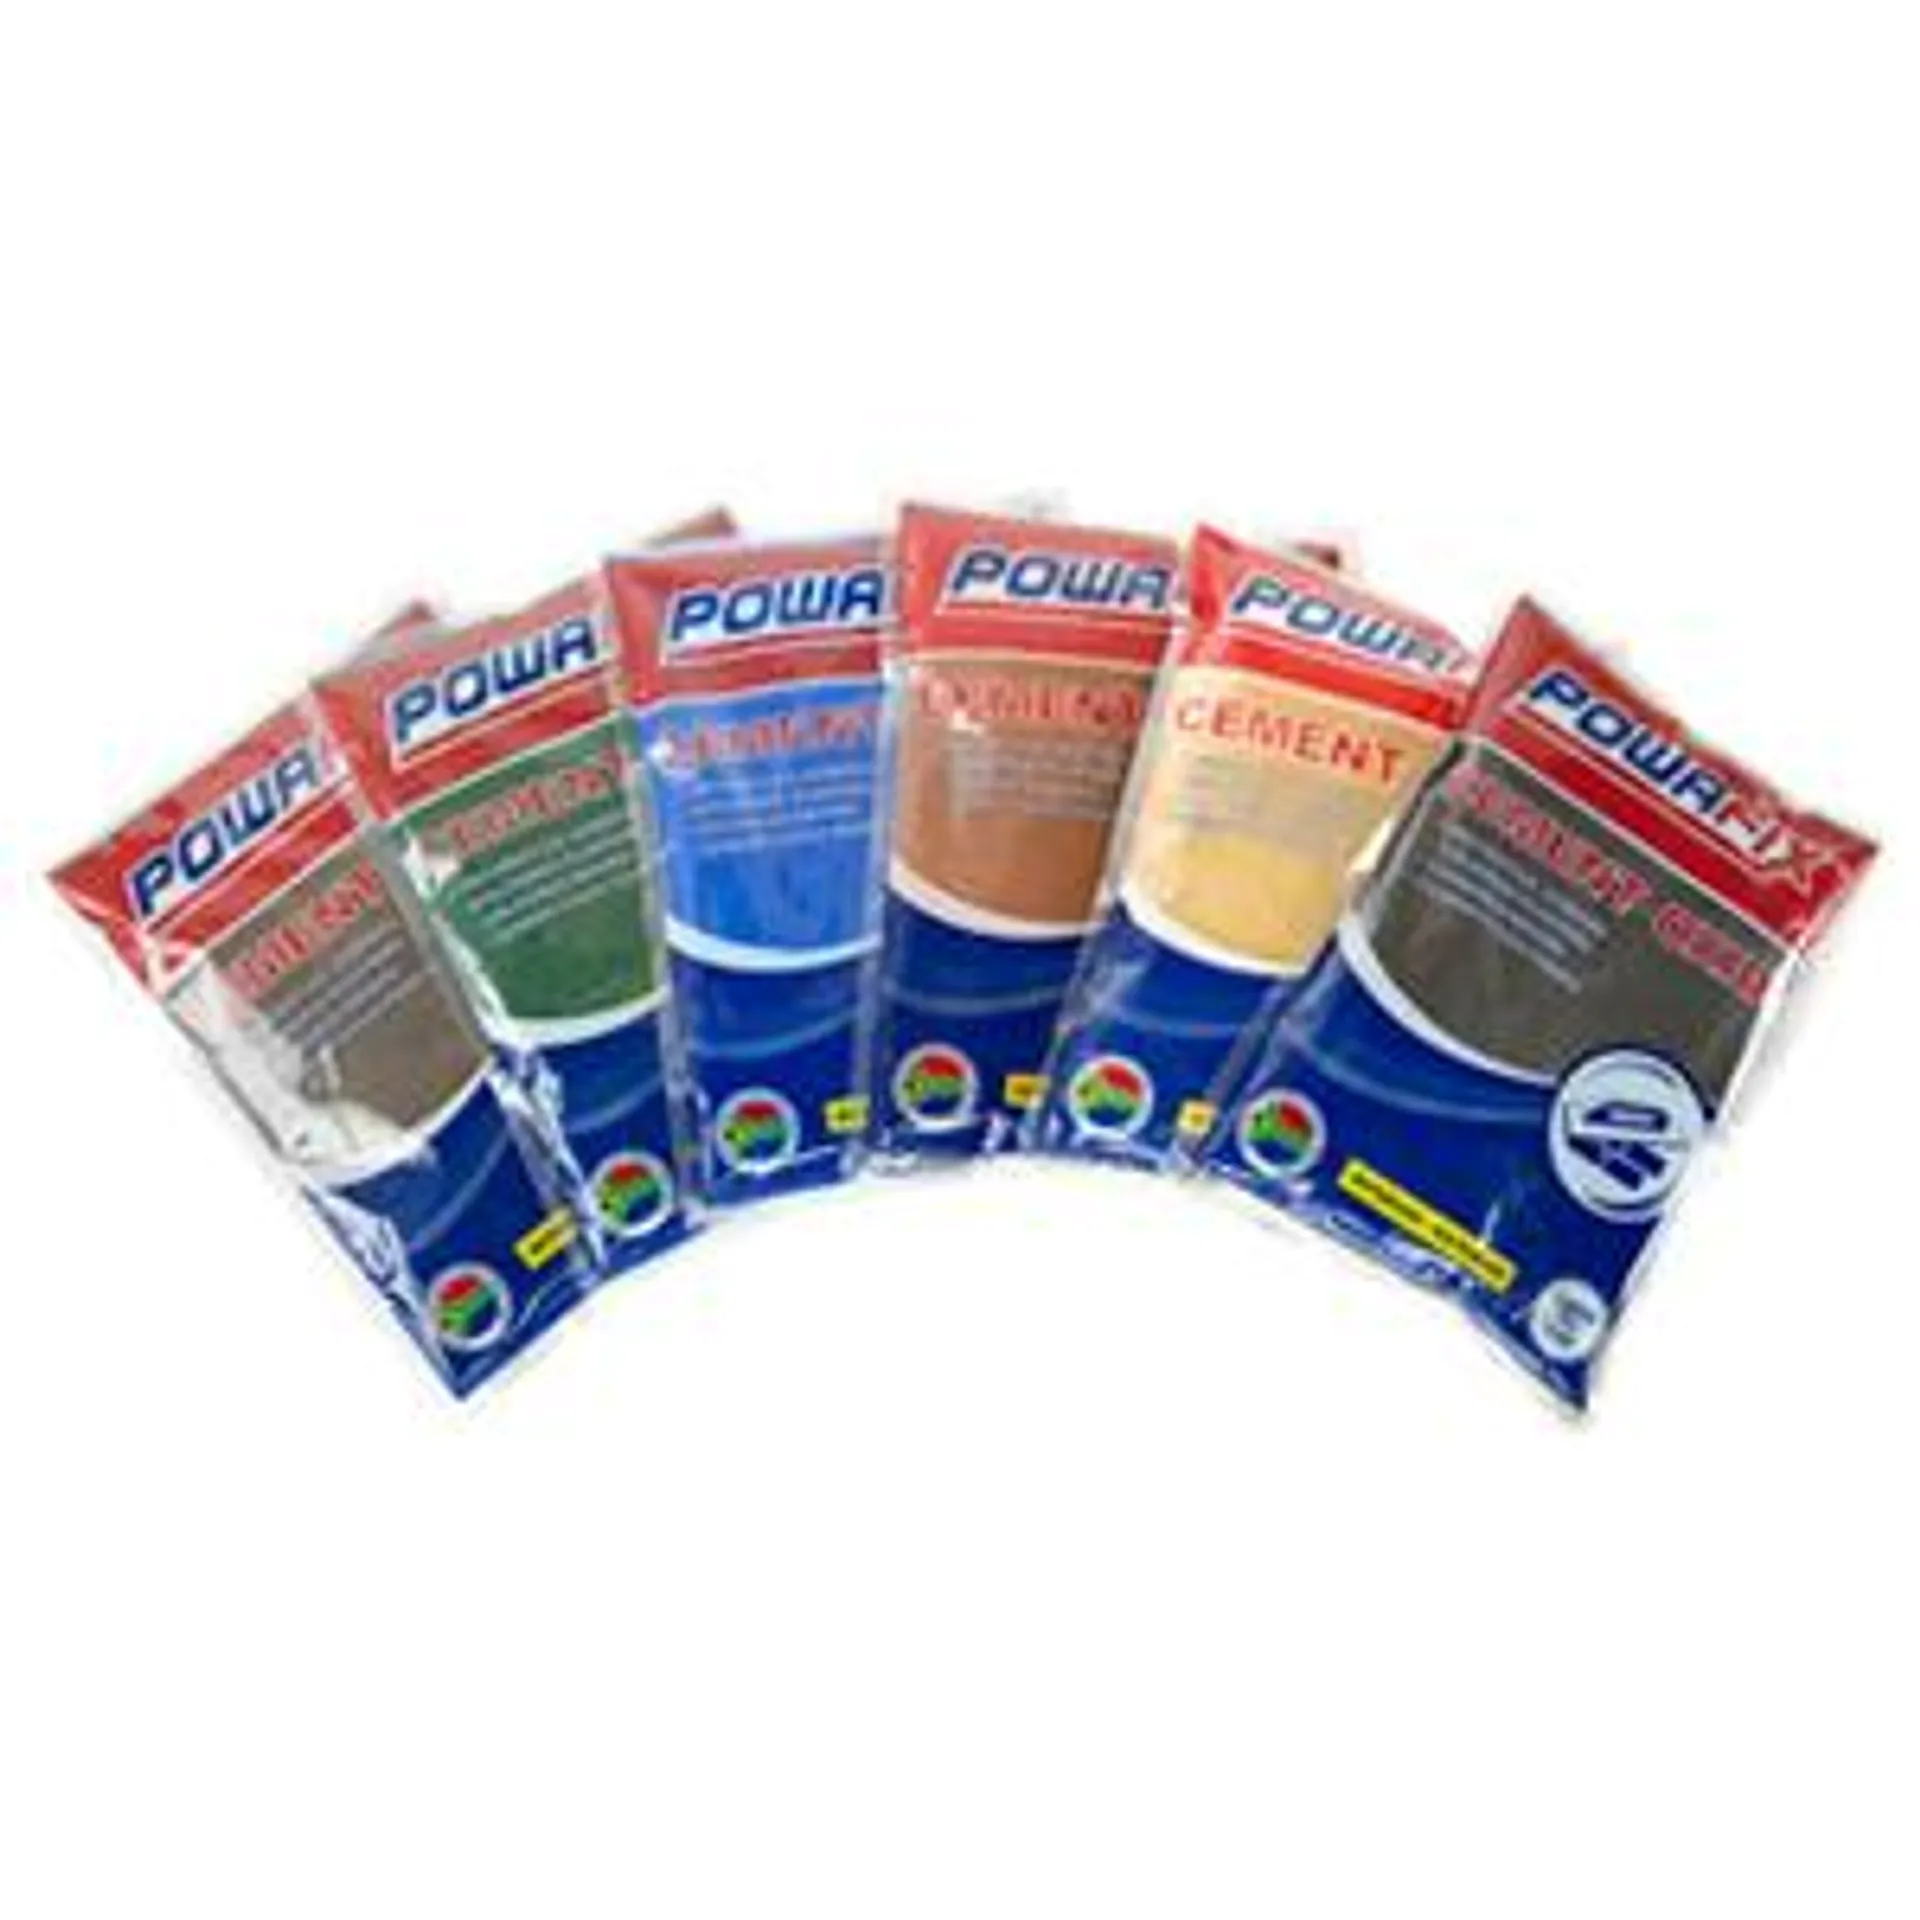 Powafix Oxide Powdered Pigment Red 500g